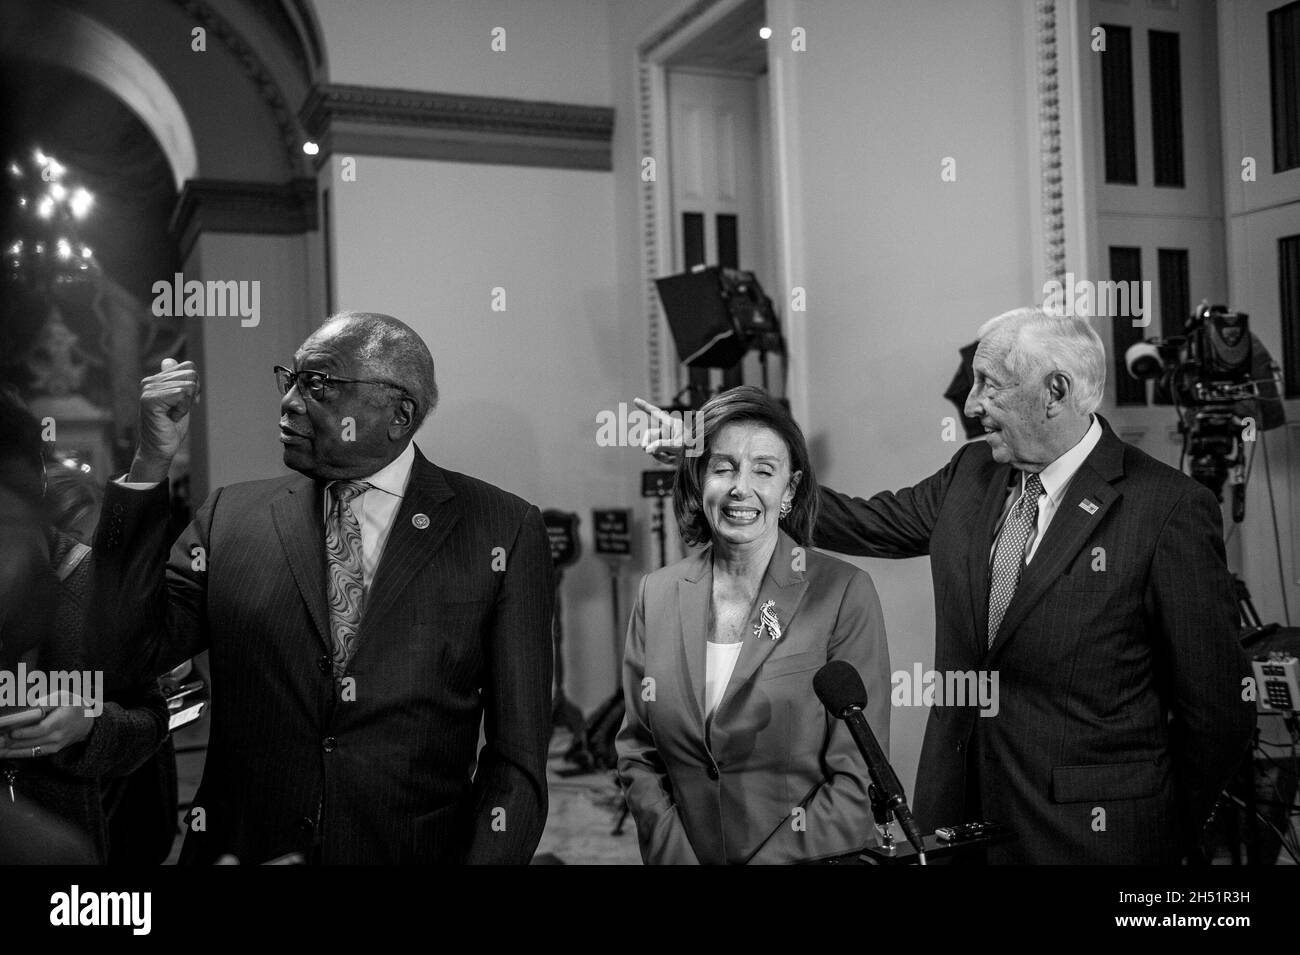 Speaker of the United States House of Representatives Nancy Pelosi (Democrat of California), center, is joined by United States House Majority Whip James Clyburn (Democrat of South Carolina), left, and United States House Majority Leader Steny Hoyer (Democrat of Maryland), right, to offer remarks to reporters as the House of Representatives prepares to vote on the Build Back Better and bipartisan Infrastructure bills at the US Capitol in Washington, DC, Thursday, November 4, 2021. Credit: Rod Lamkey/CNP Stock Photo